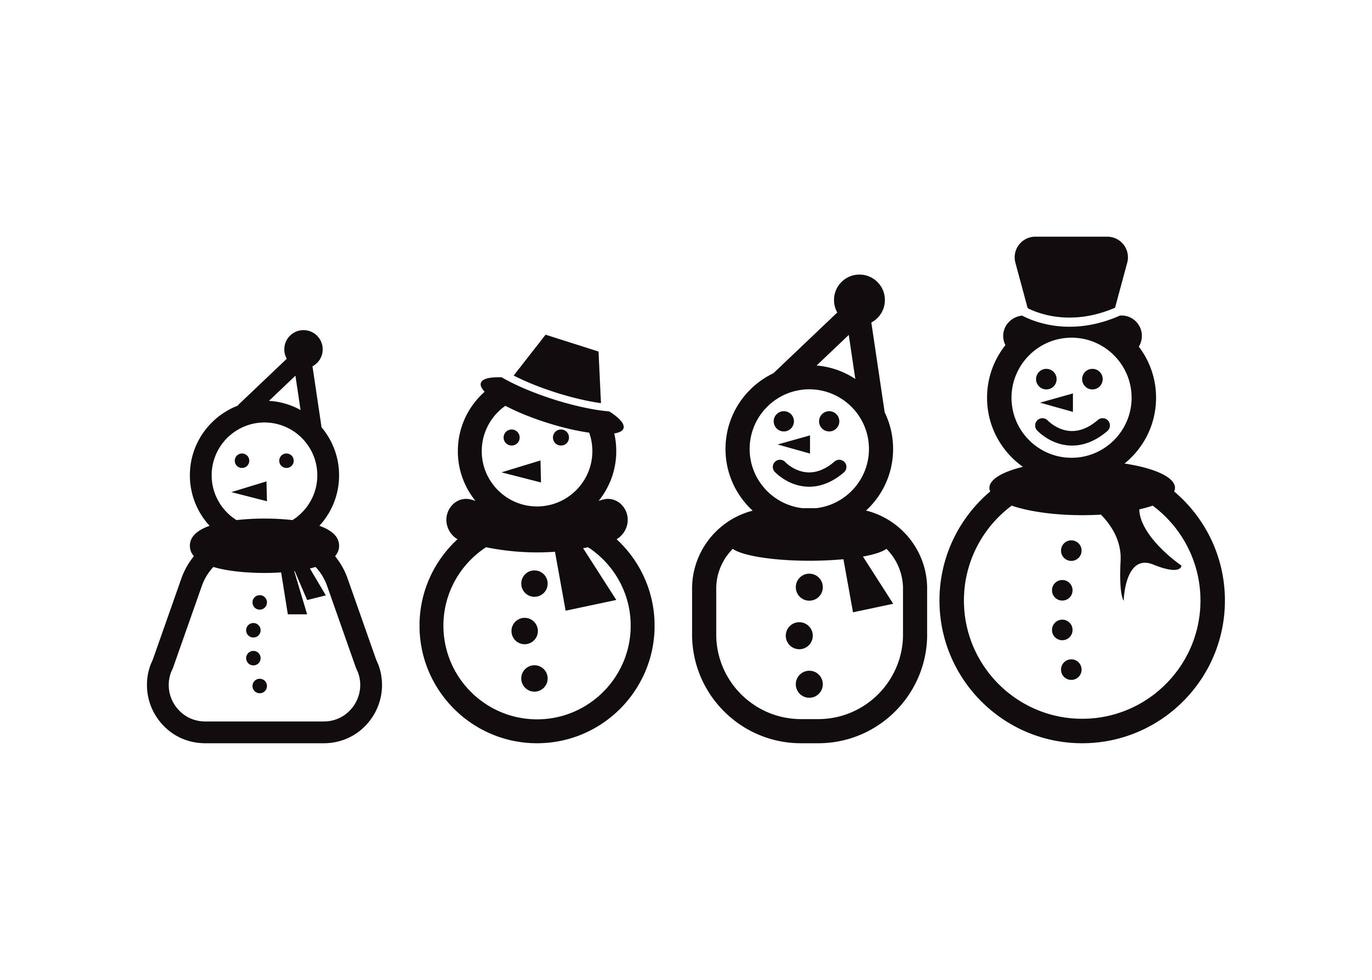 Snowman icon design template vector isolated illustration